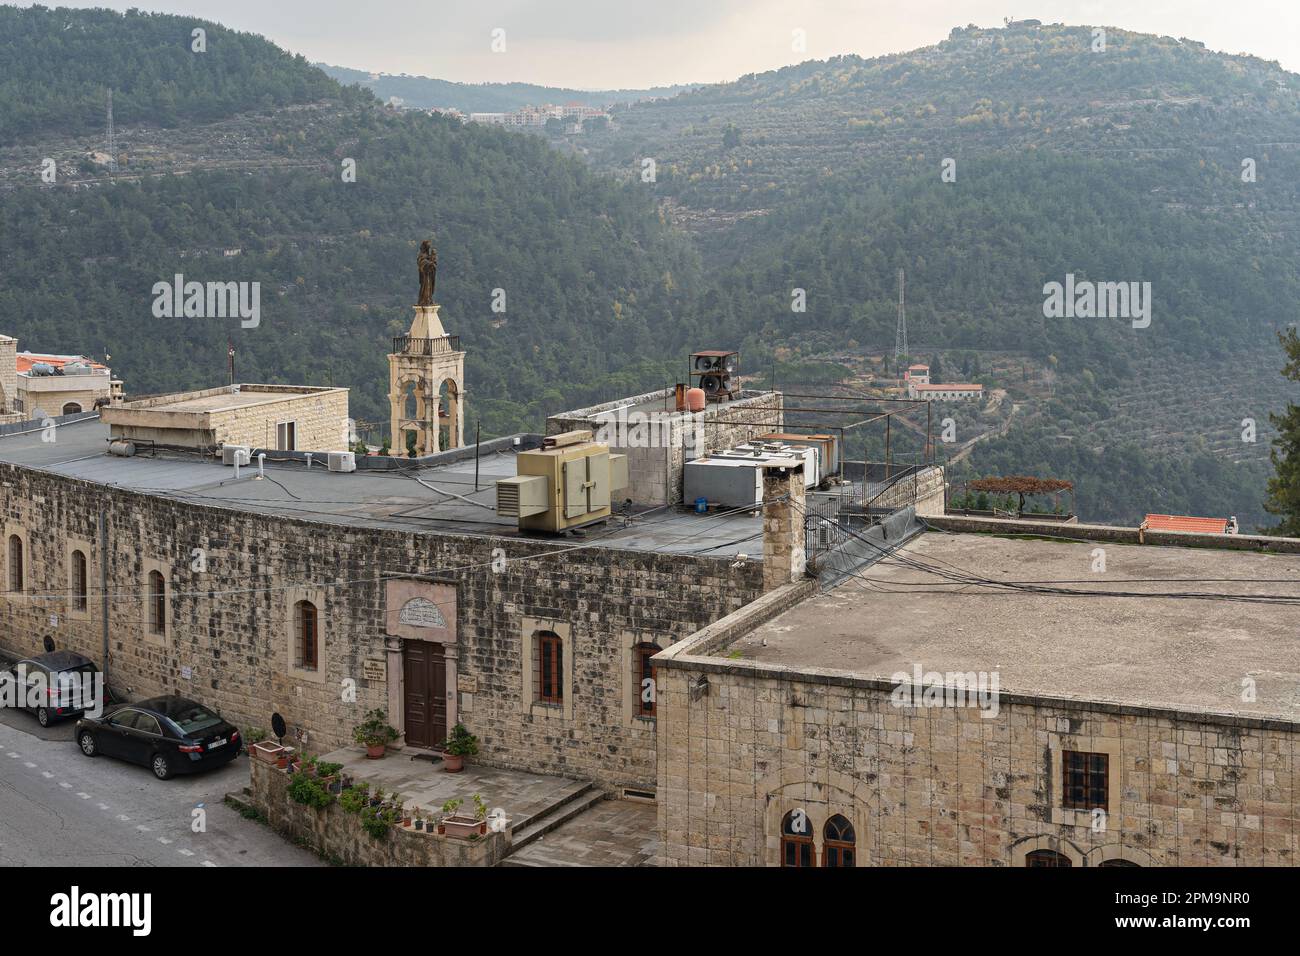 The square and the old mosque in Deir el Qamar, Lebanon Stock Photo